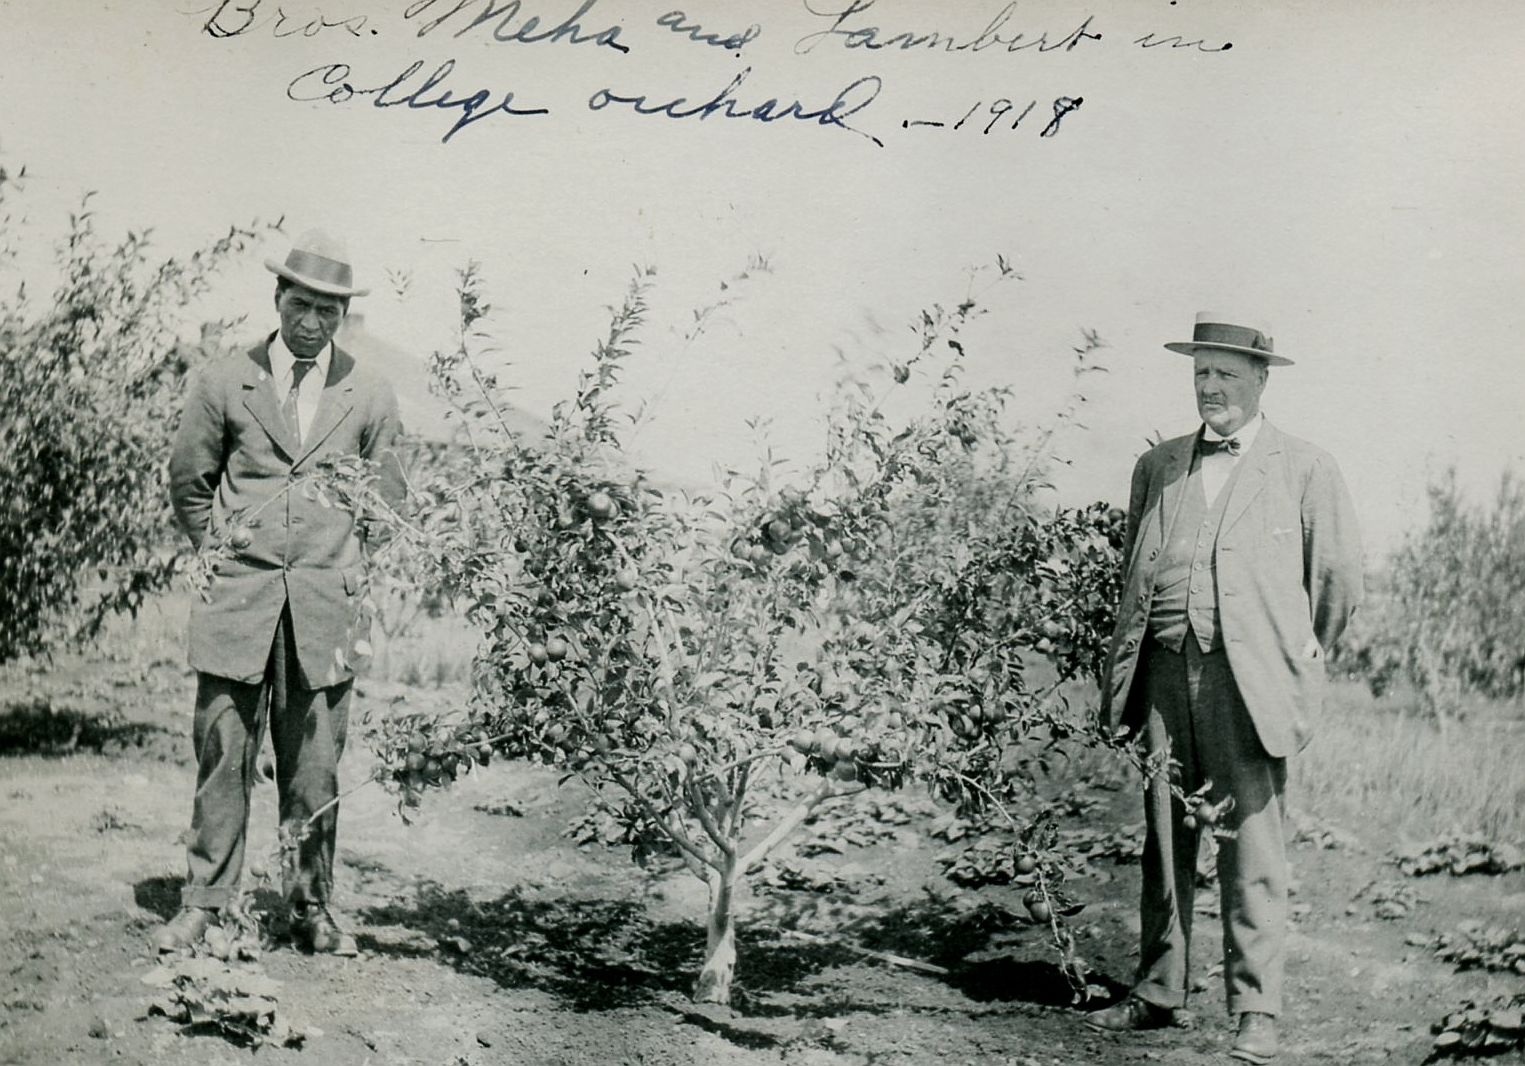 Brothers Meha and Lambert in MAC orchard, 1918, New Zealand